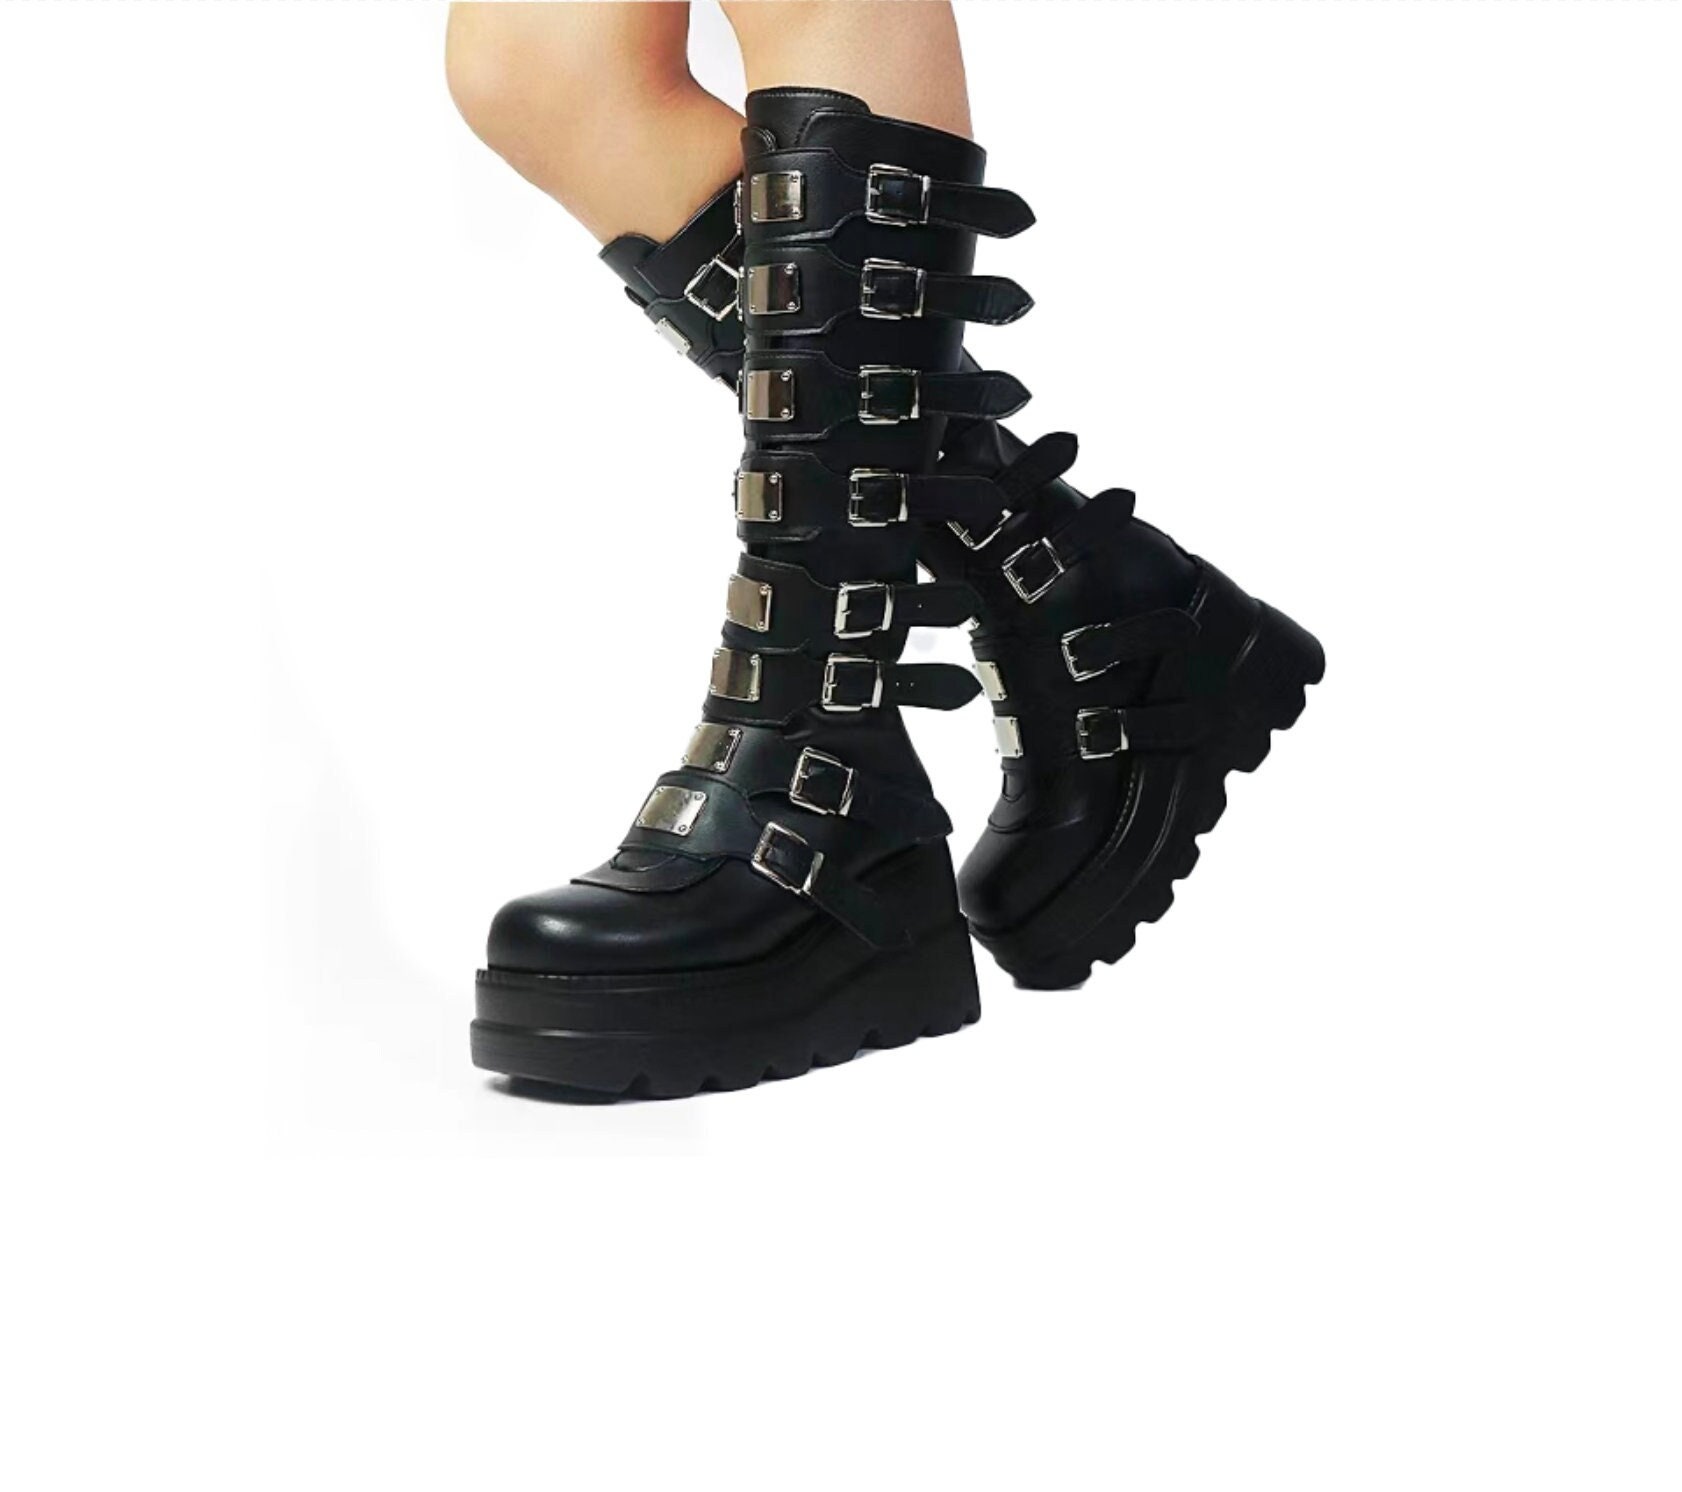 Y2K Unisex Punk Boots - Edgy and Stylish Footwear for All Genders